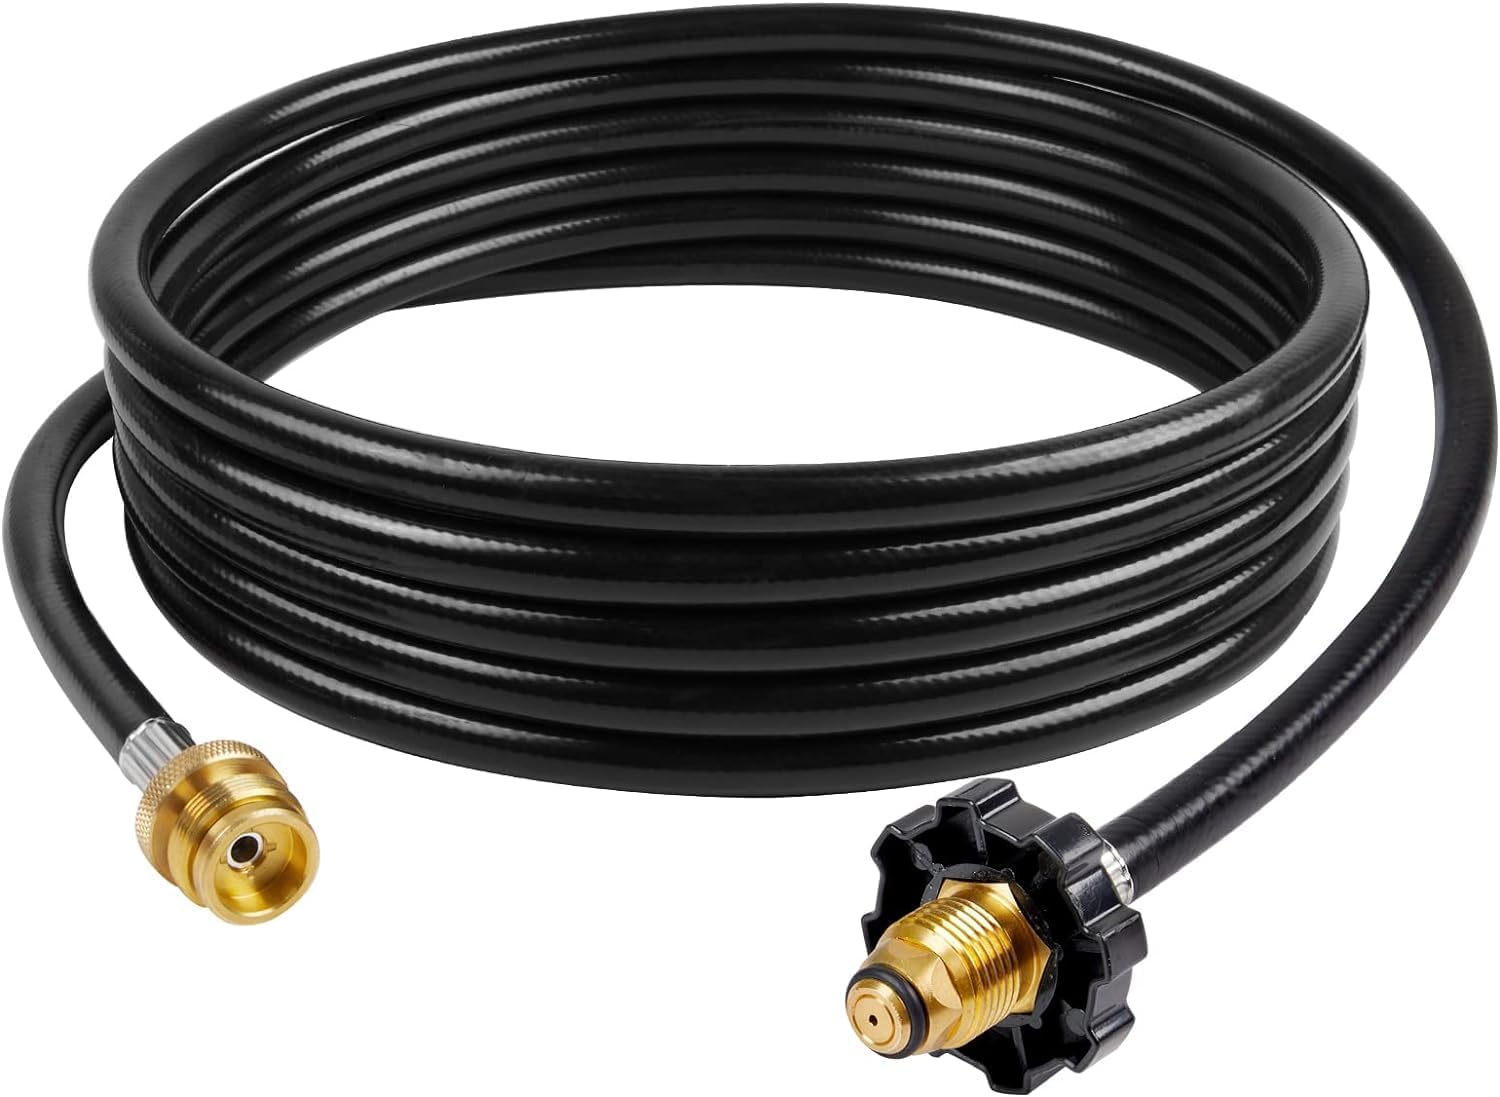 GASPRO 12-Foot Propane Hose Adapter, Compatible with Mr. Heater Buddy Heater, Portable Grill, and More, Connects to 5-100lb Tank